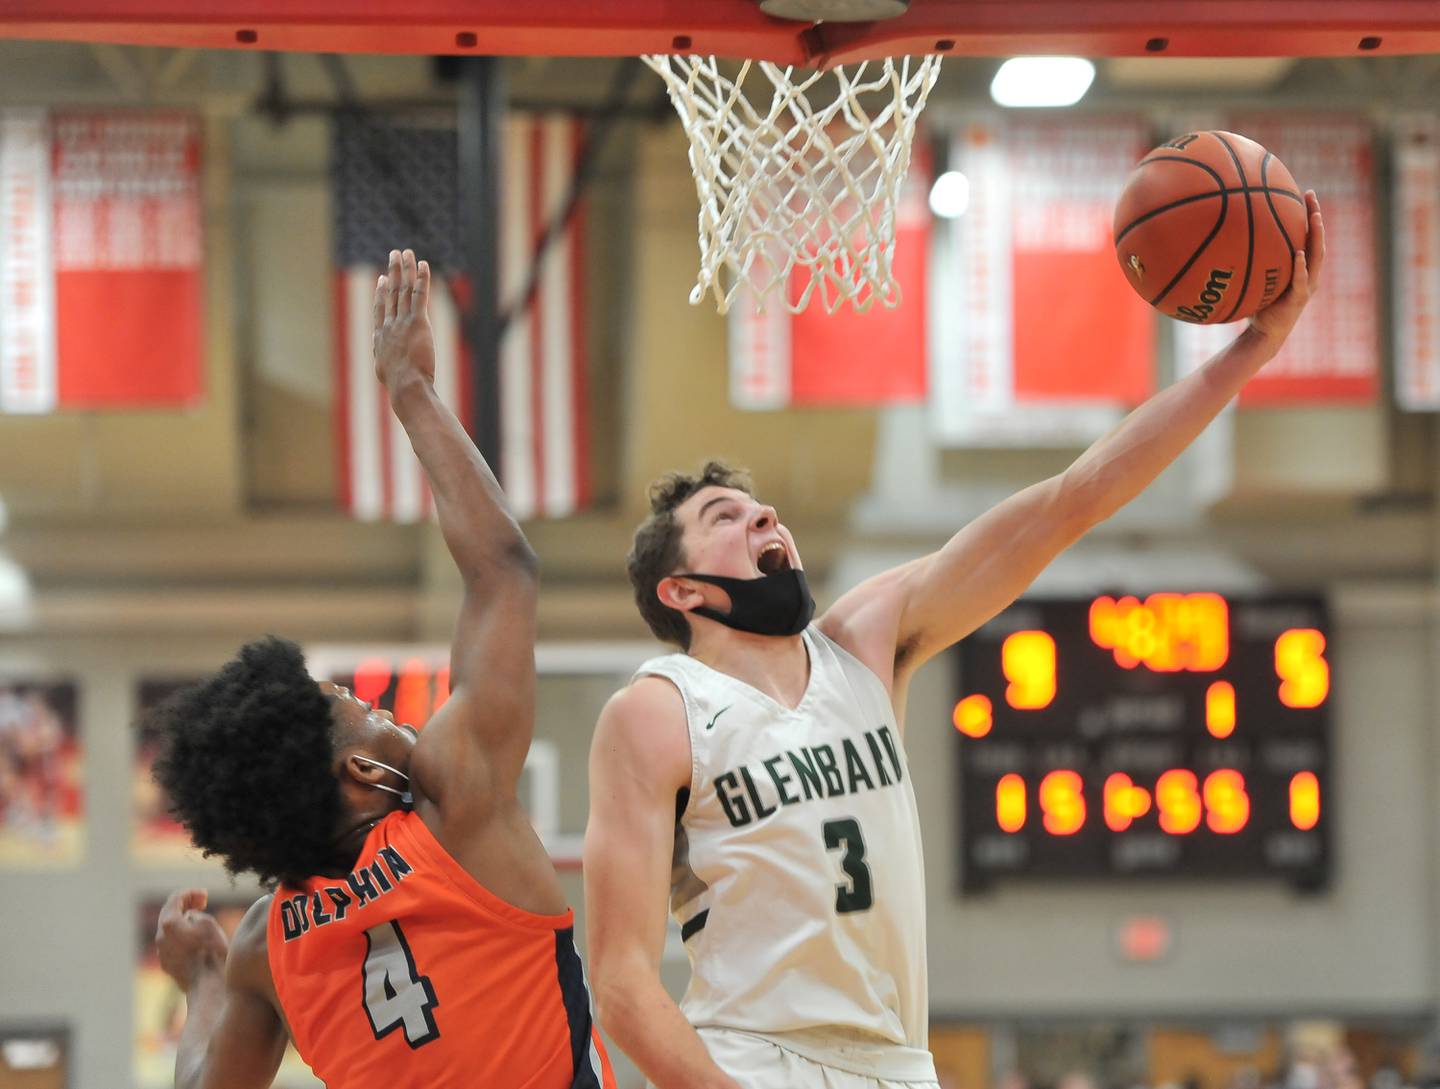 Glenbard West's Caden Pierce (3) does a reverse layup in front of Whitney Young's Marcus Pigram (4) during a game on Jan. 22, 2022 at Benet Academy in Lisle.